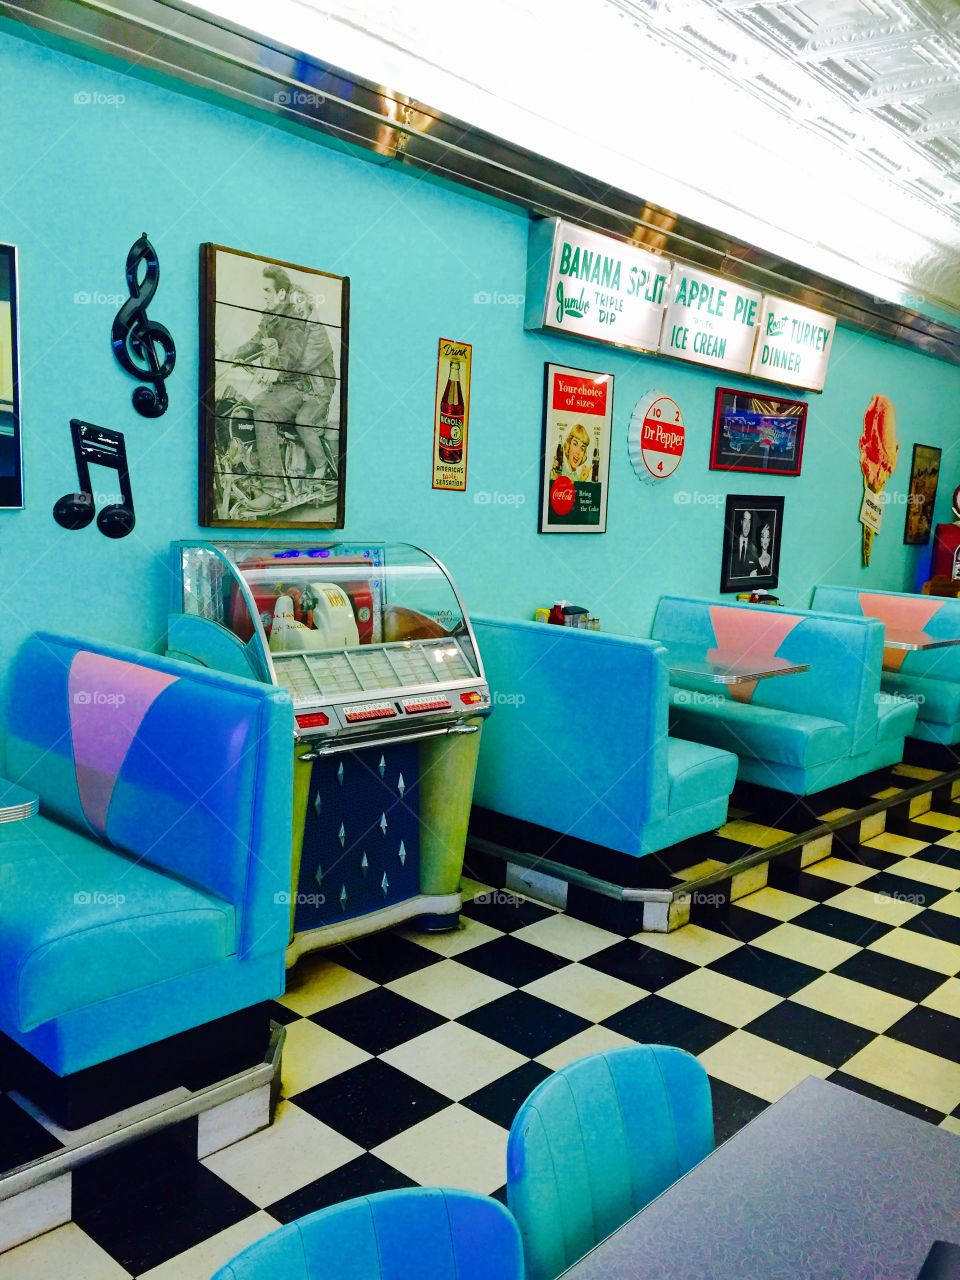 Malt Shop Diner with Jukebox and Americana classic ads. 